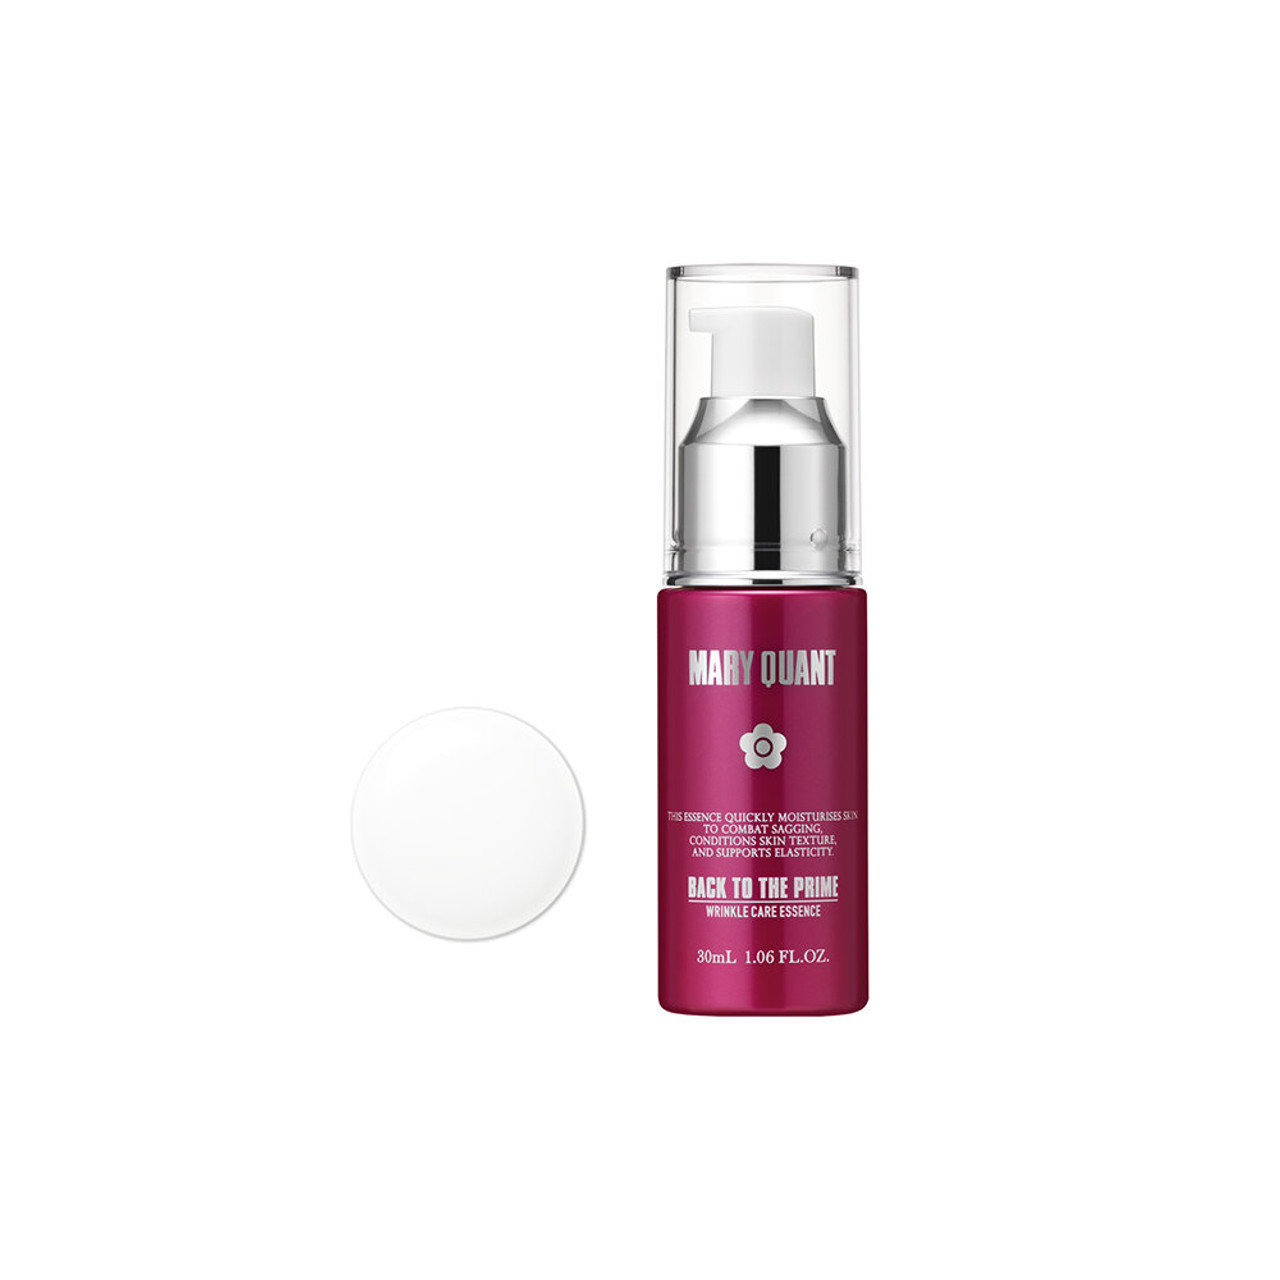 highly moisturising beauty essence to keep your skin hydrated at every level for longer